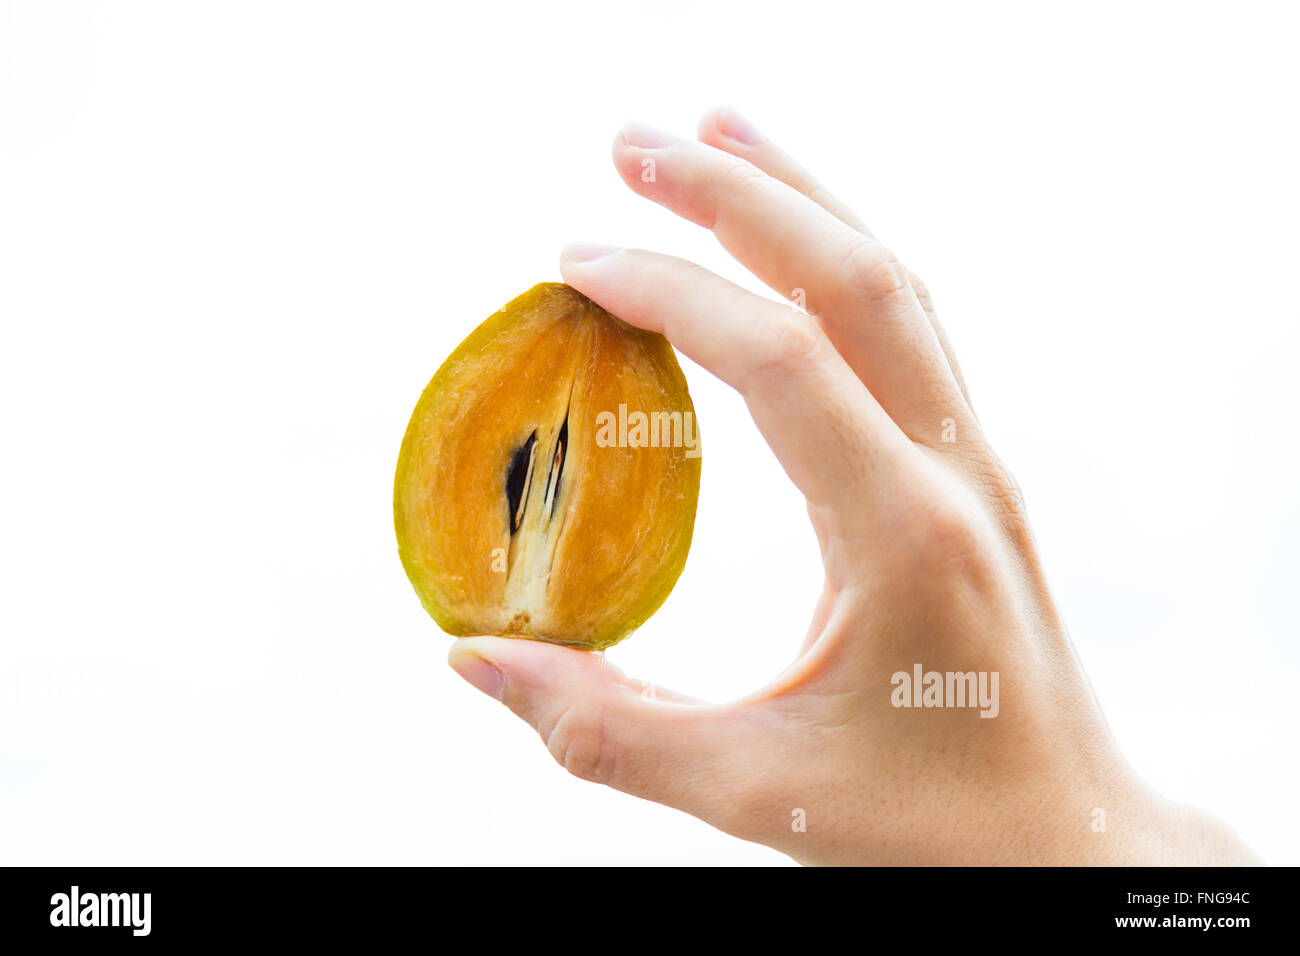 Half of sapodilla fruit held in the hand of a young woman, isolated on white. Stock Photo